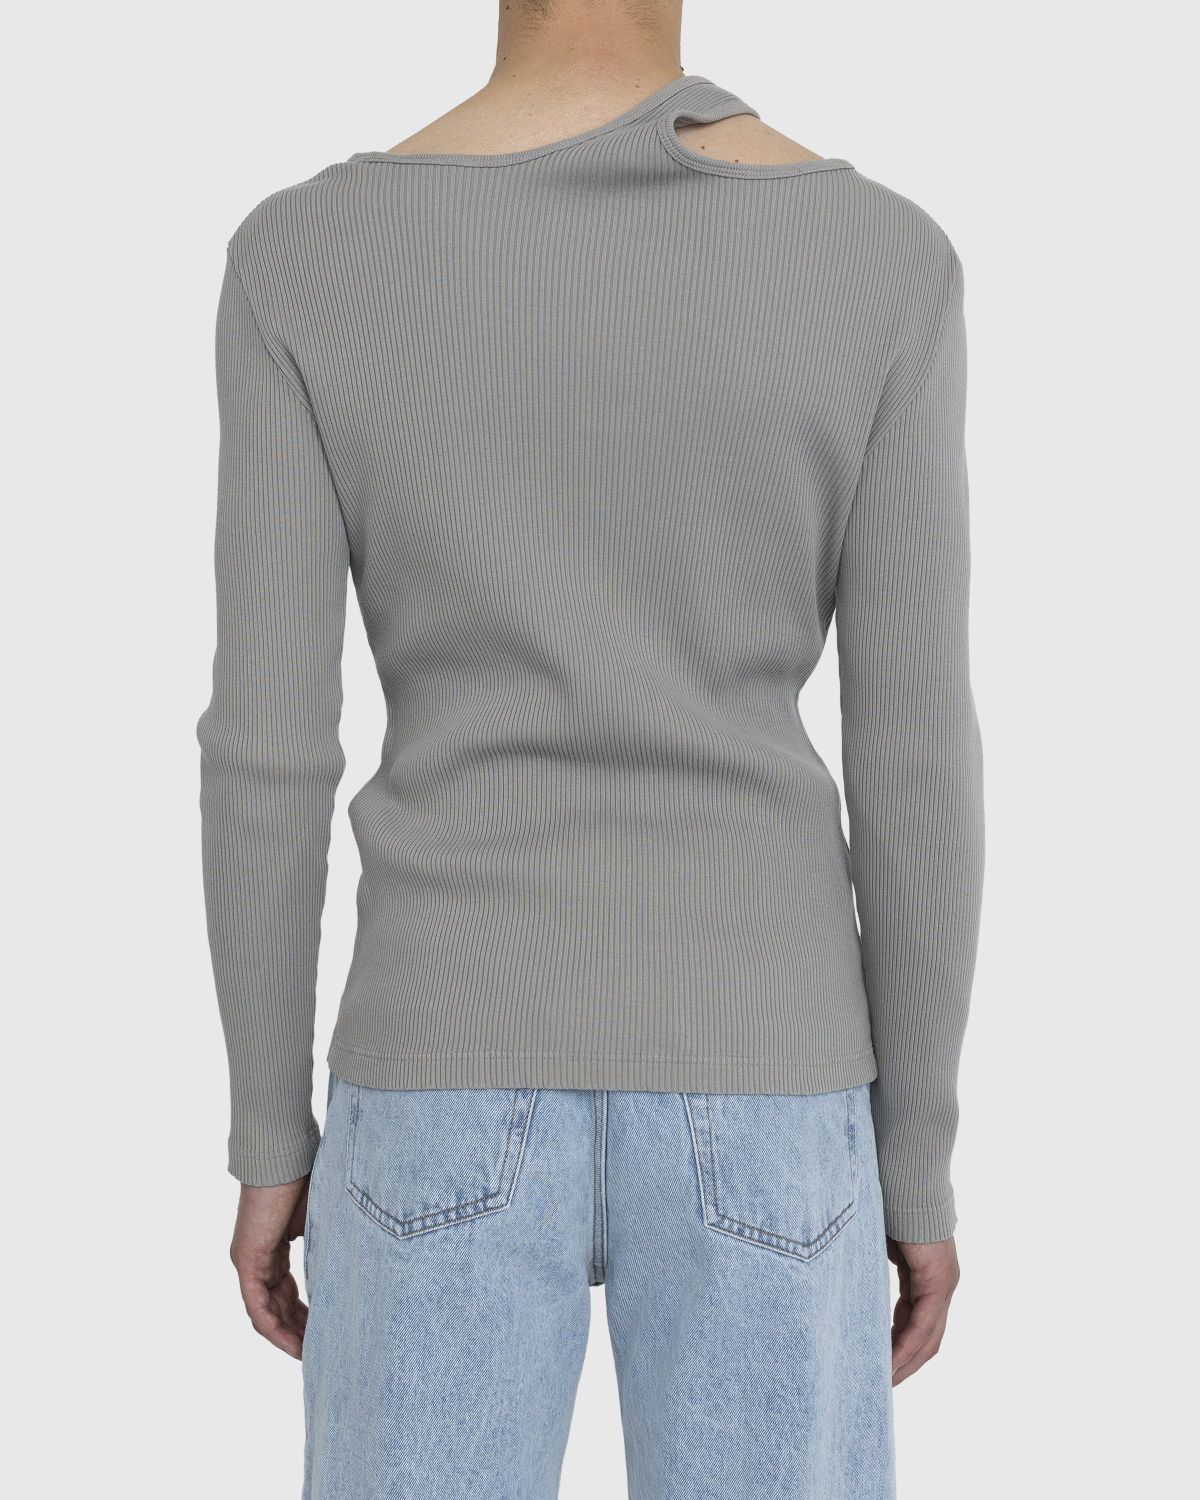 Y/Project – Classic Double Collar T-Shirt Taupe - Longsleeves - Grey - Image 4